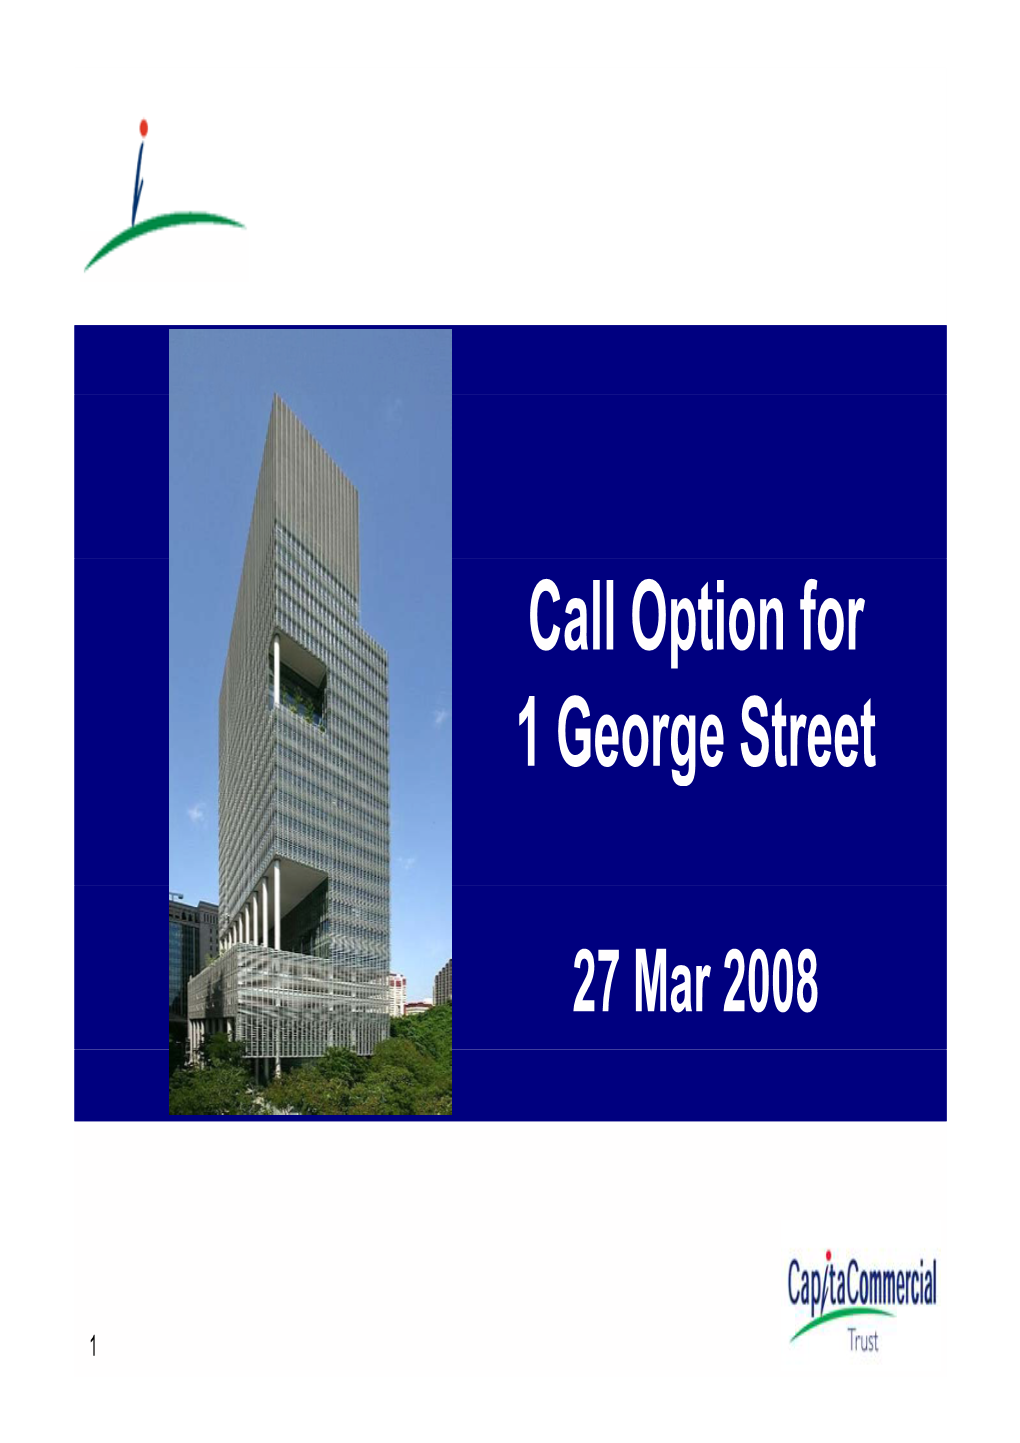 Call Option for 1 George Street